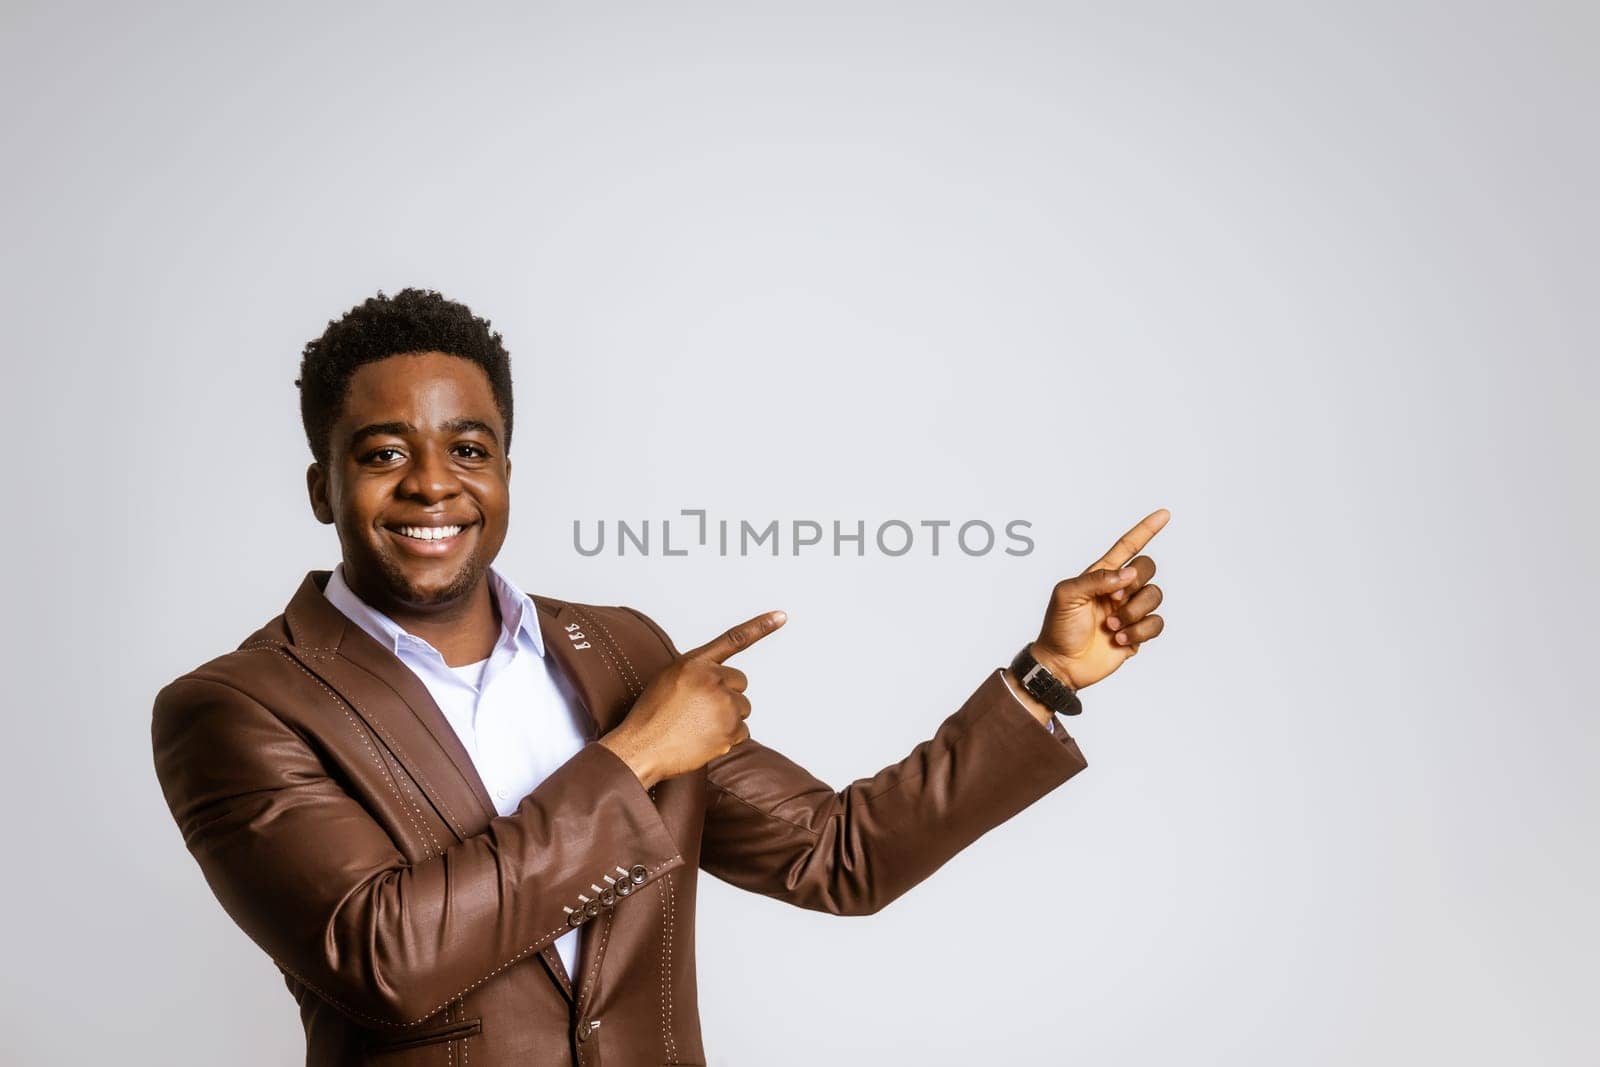 Portrait of happy businessman who is smiling and pointing at blank space on image. Copy space for your text or advert.